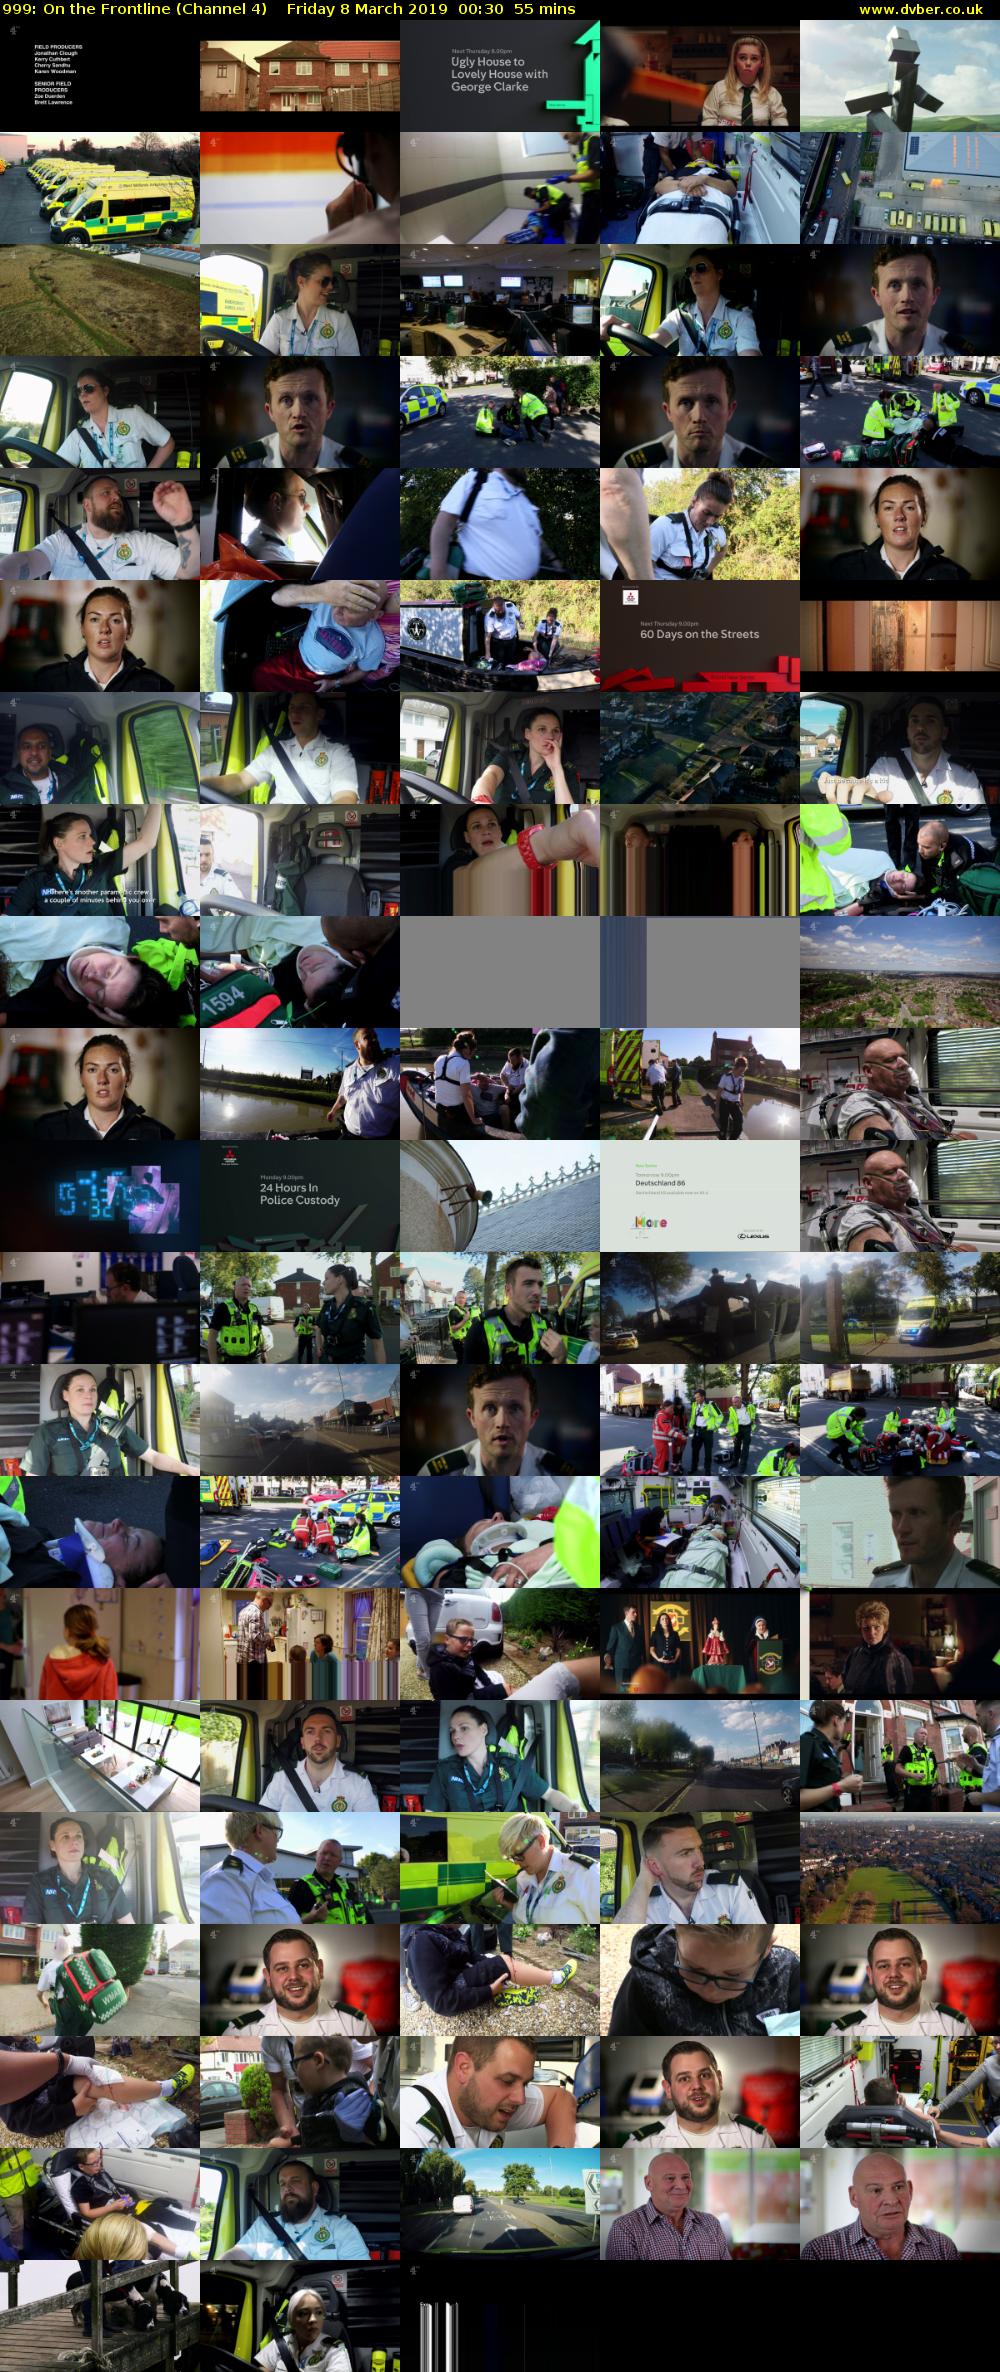 999: On the Frontline (Channel 4) Friday 8 March 2019 00:30 - 01:25